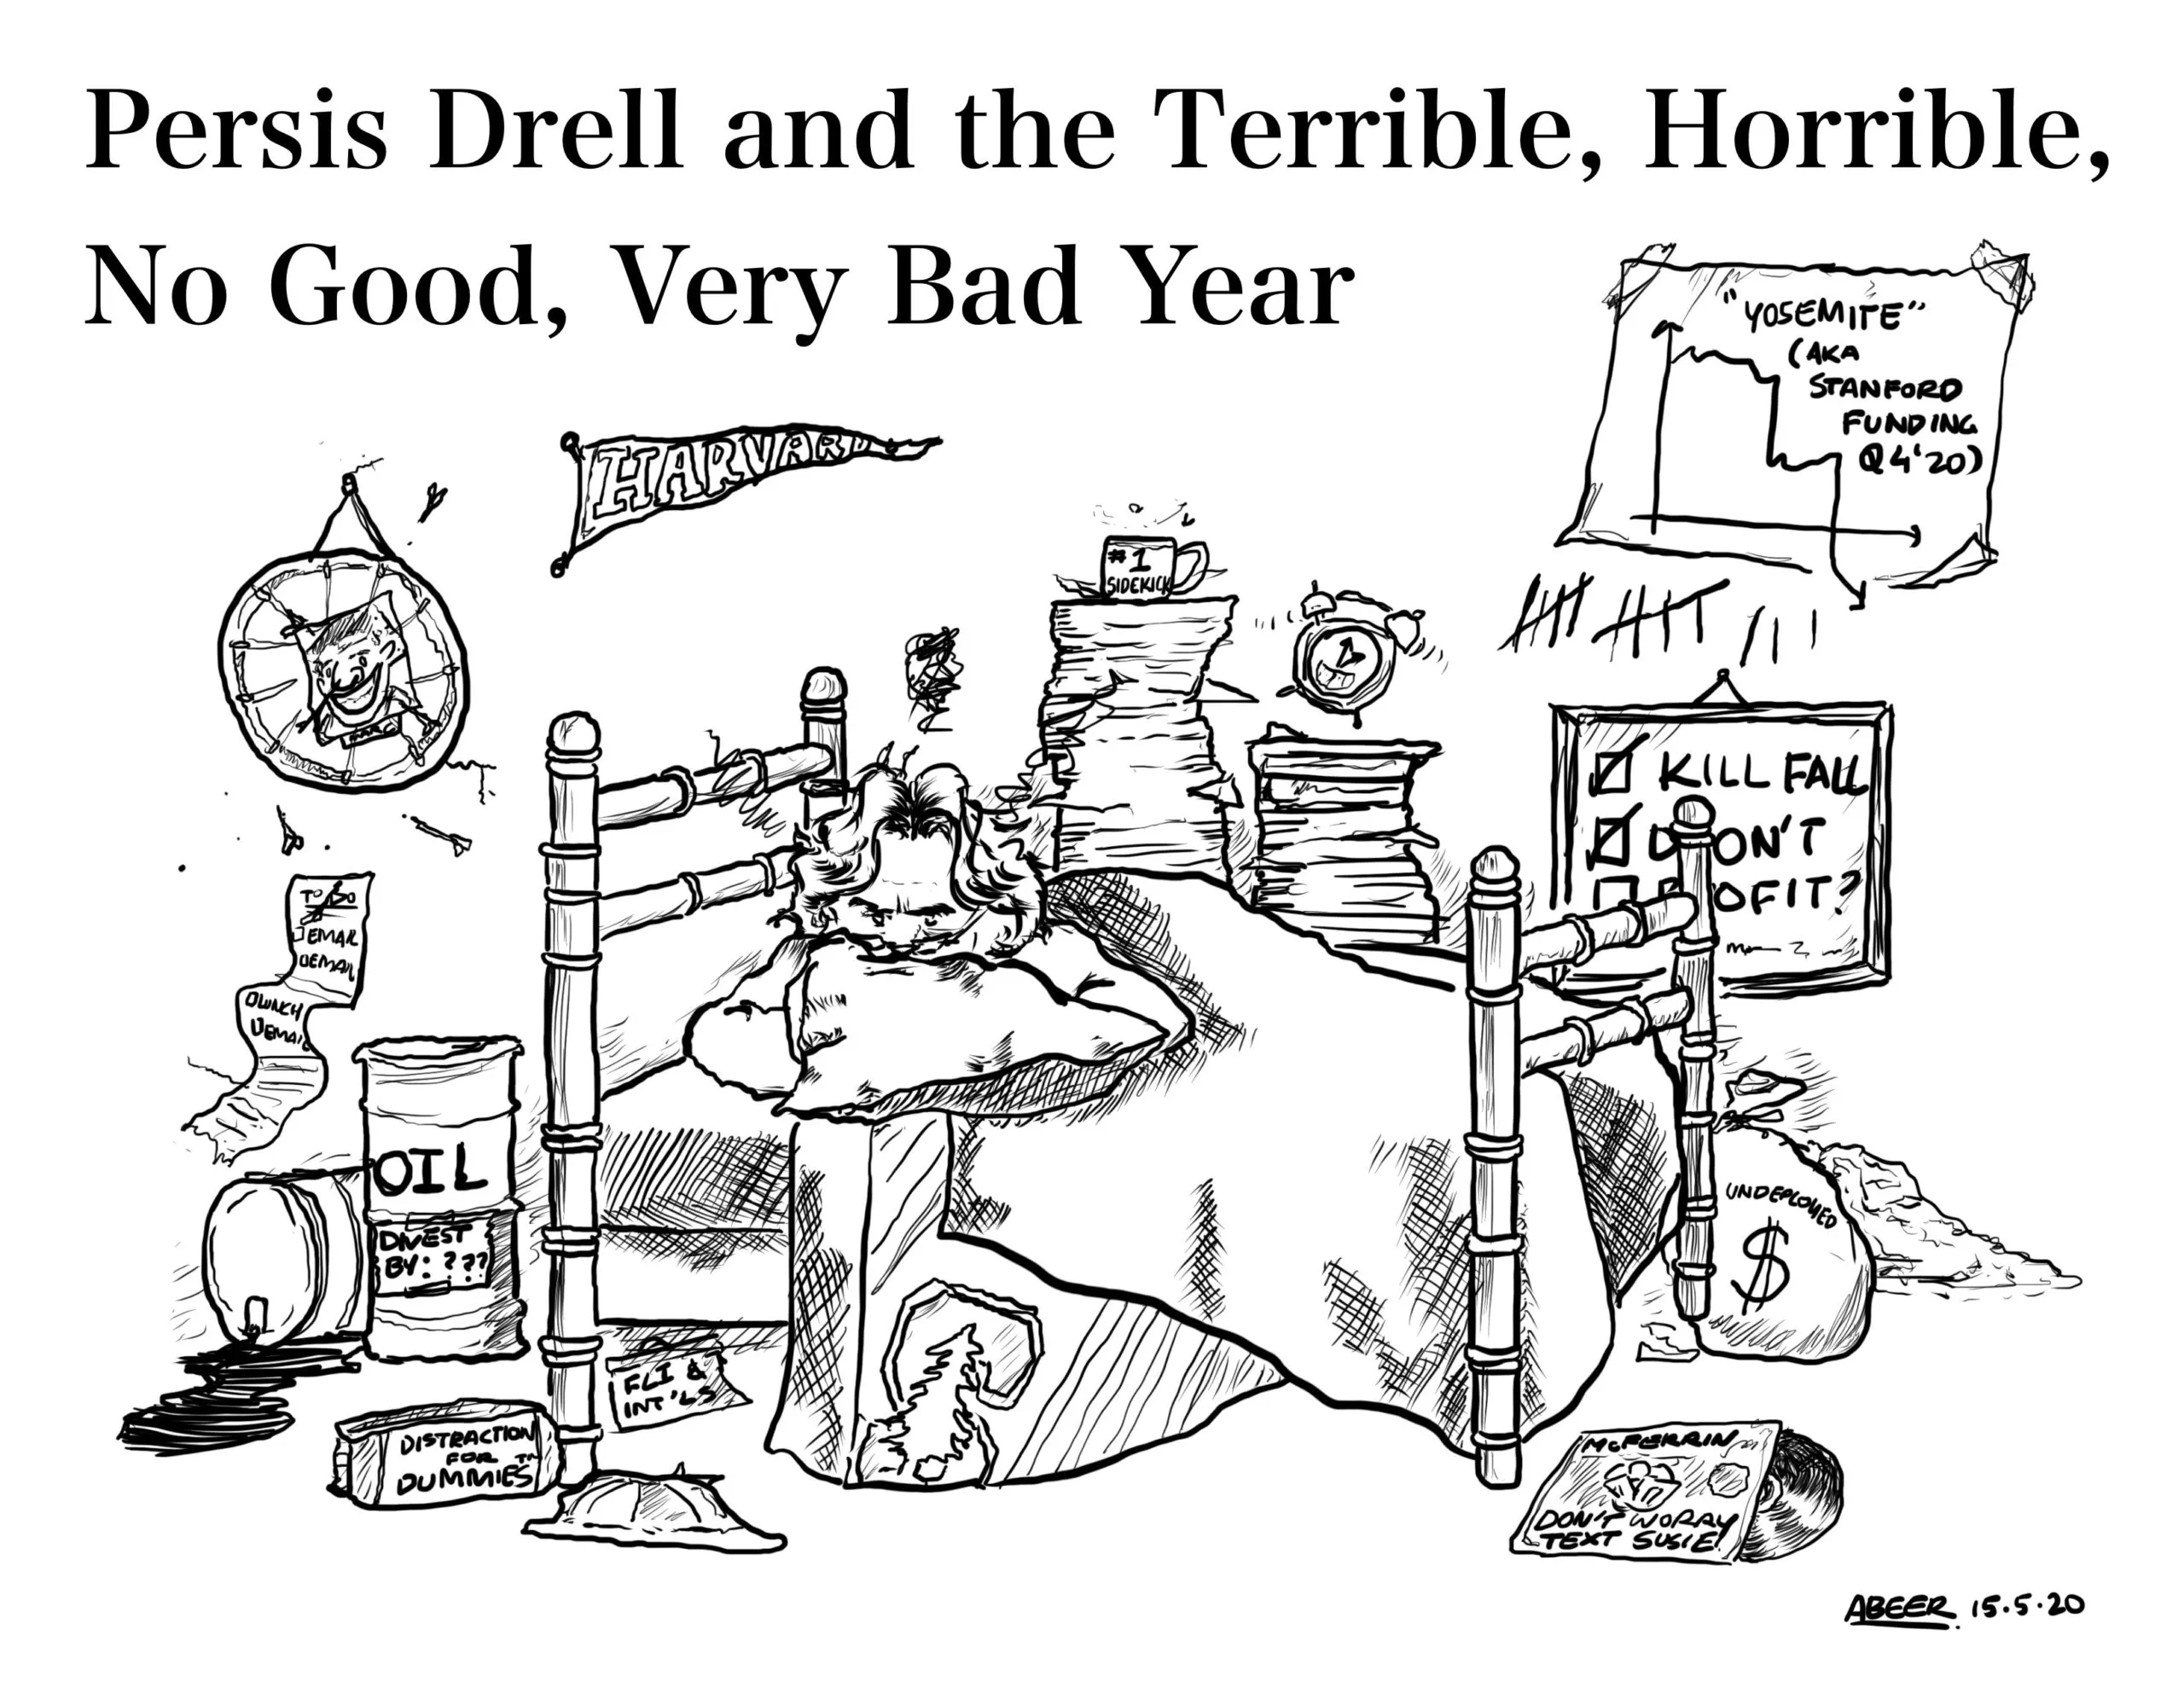 Persis Drell and the Terrible, Horrible, No Good, Very Bad Year